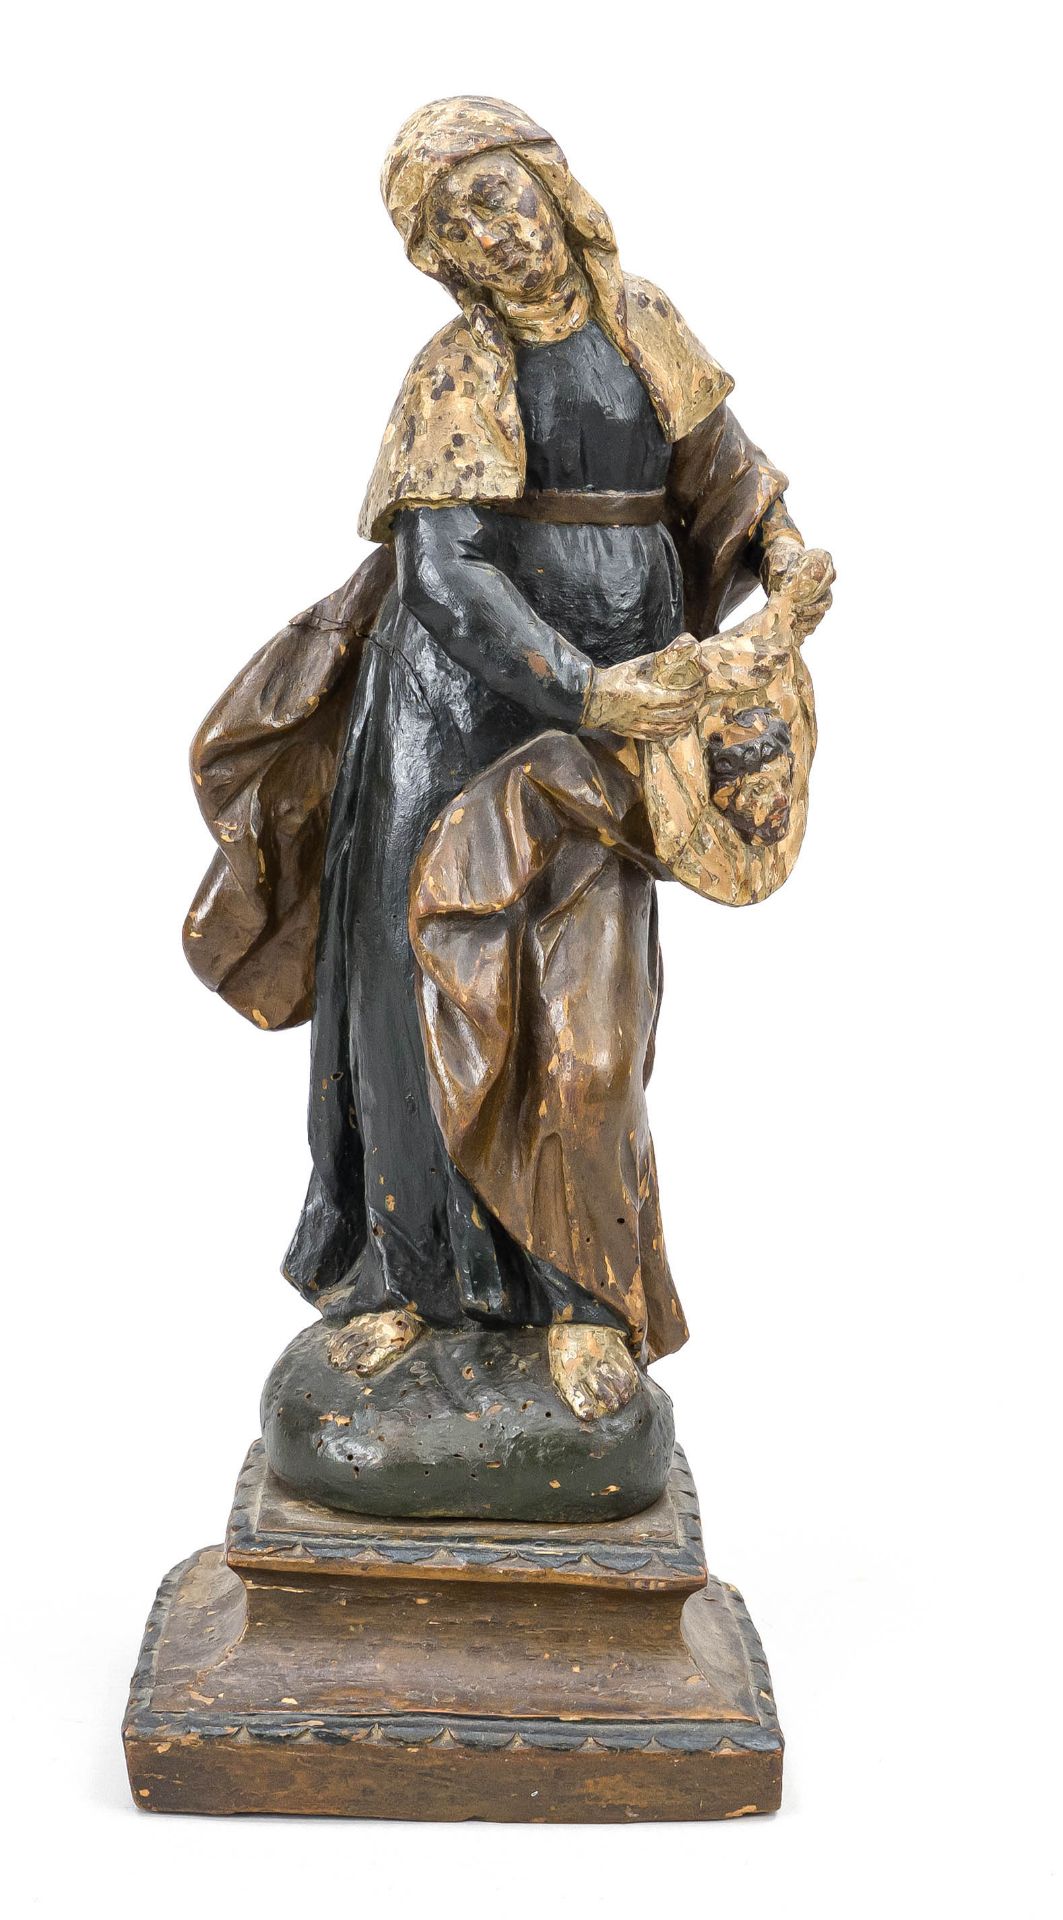 Devotional figure of the 18th century, Veronica with the sweat cloth, polychrome painted wooden